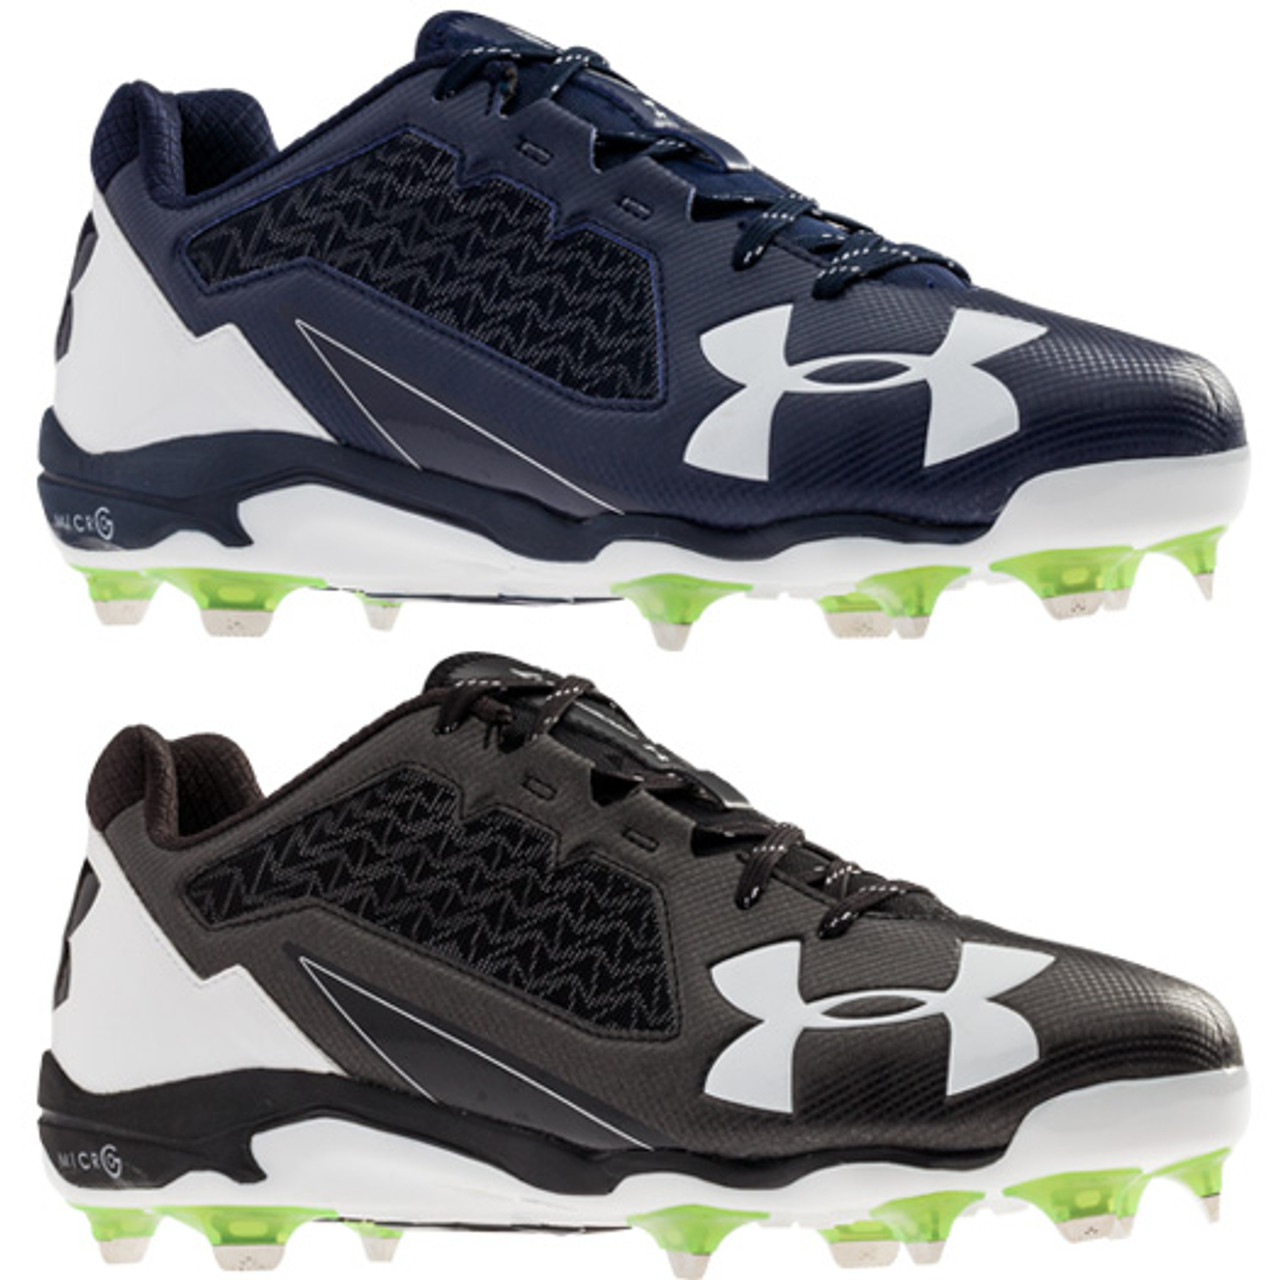 under armour cleats for baseball